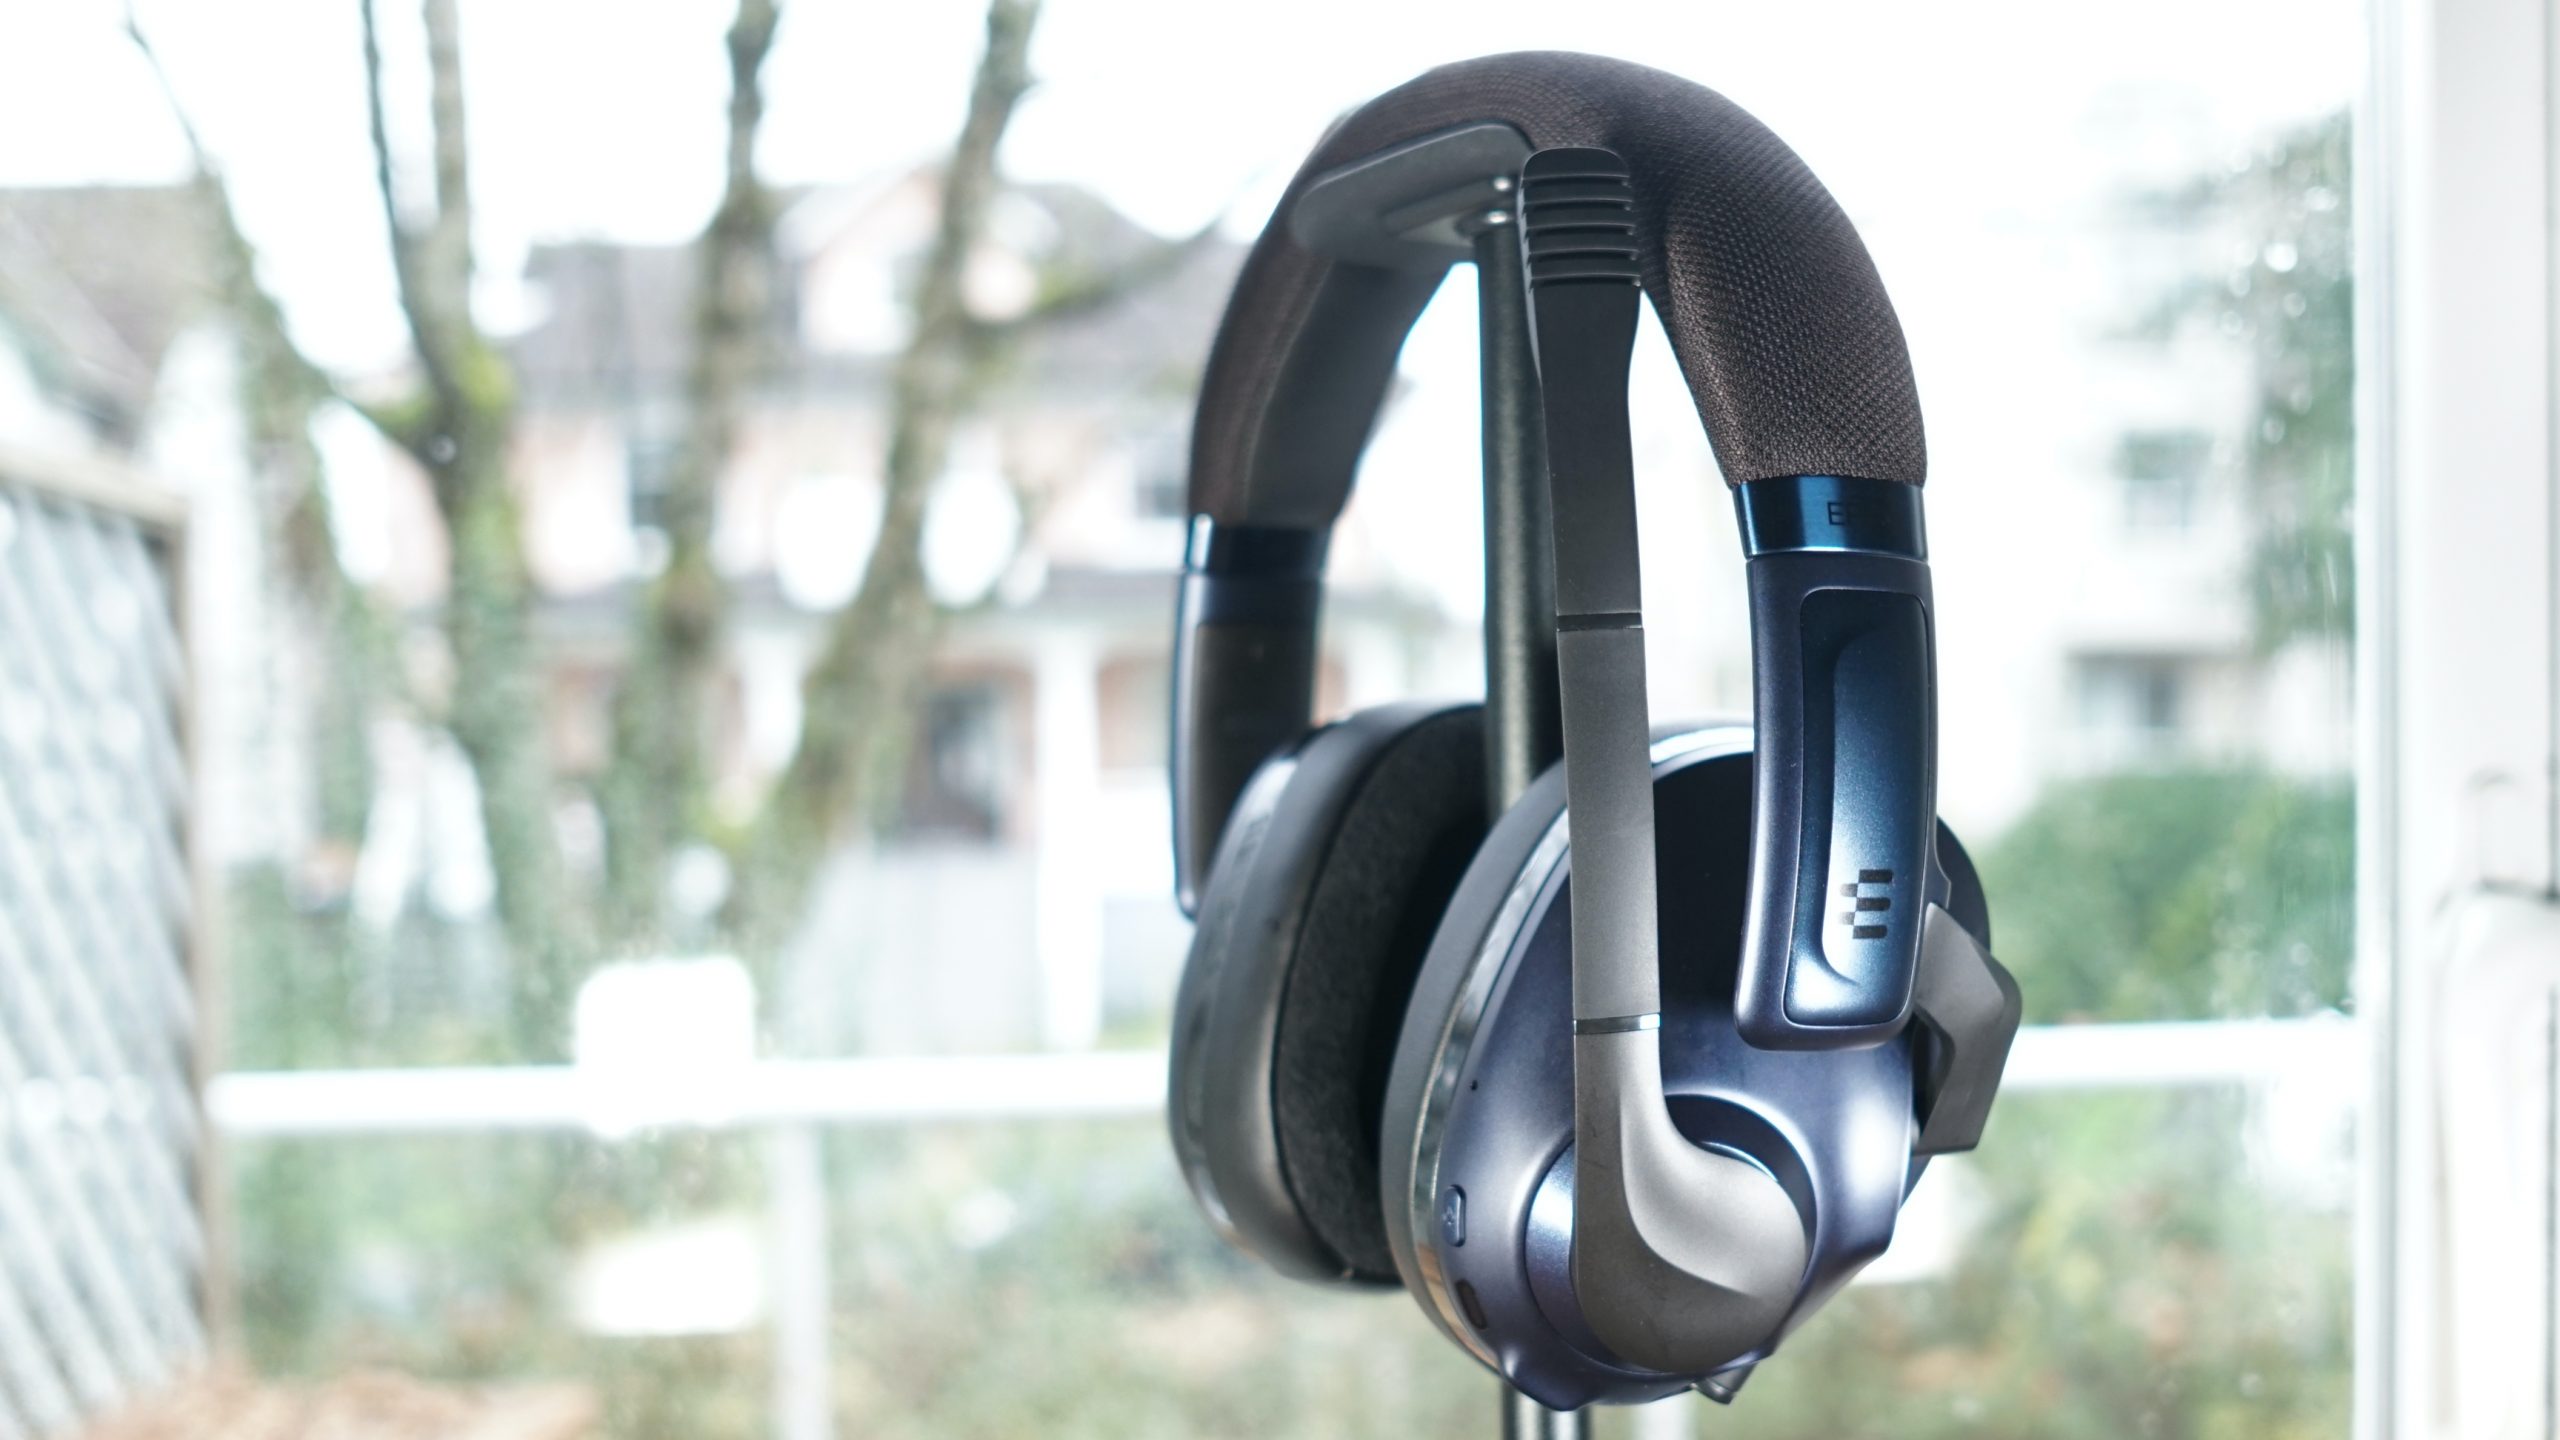 The EPOS H3PRO Hybrid gaming headset sits on a headphone stand